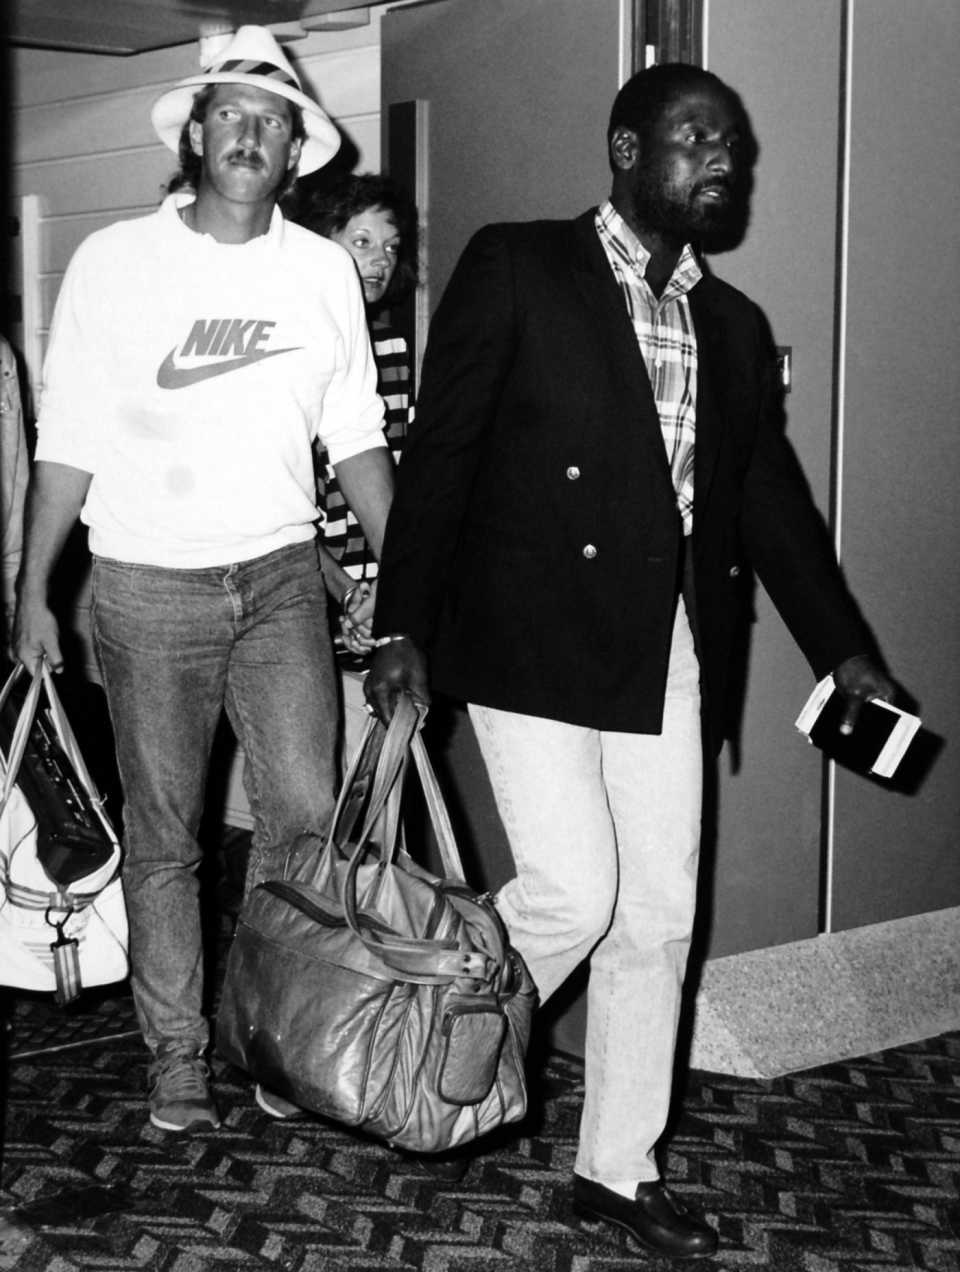 Ian Botham and Viv Richards arrive in London after England's tour of West Indies